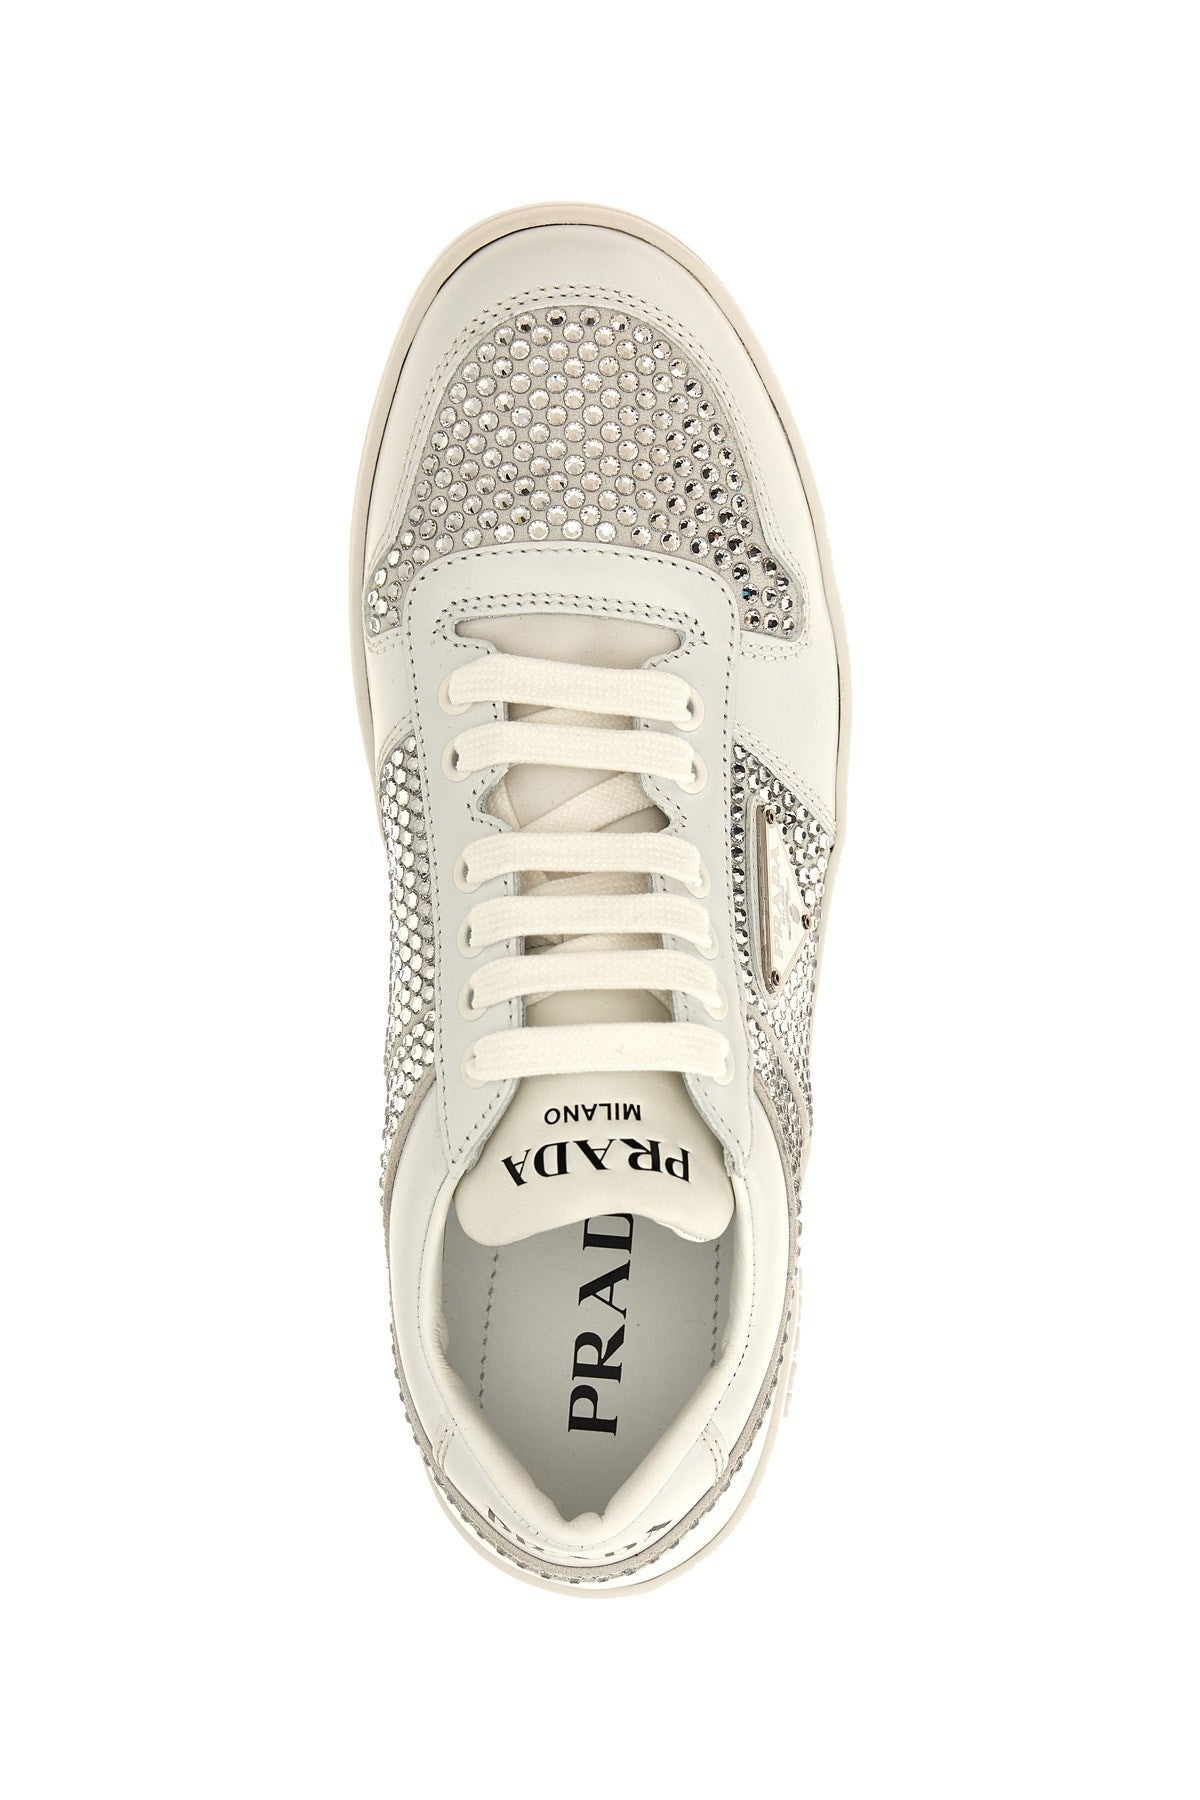 Prada Women Sneakers With Crystals - 3